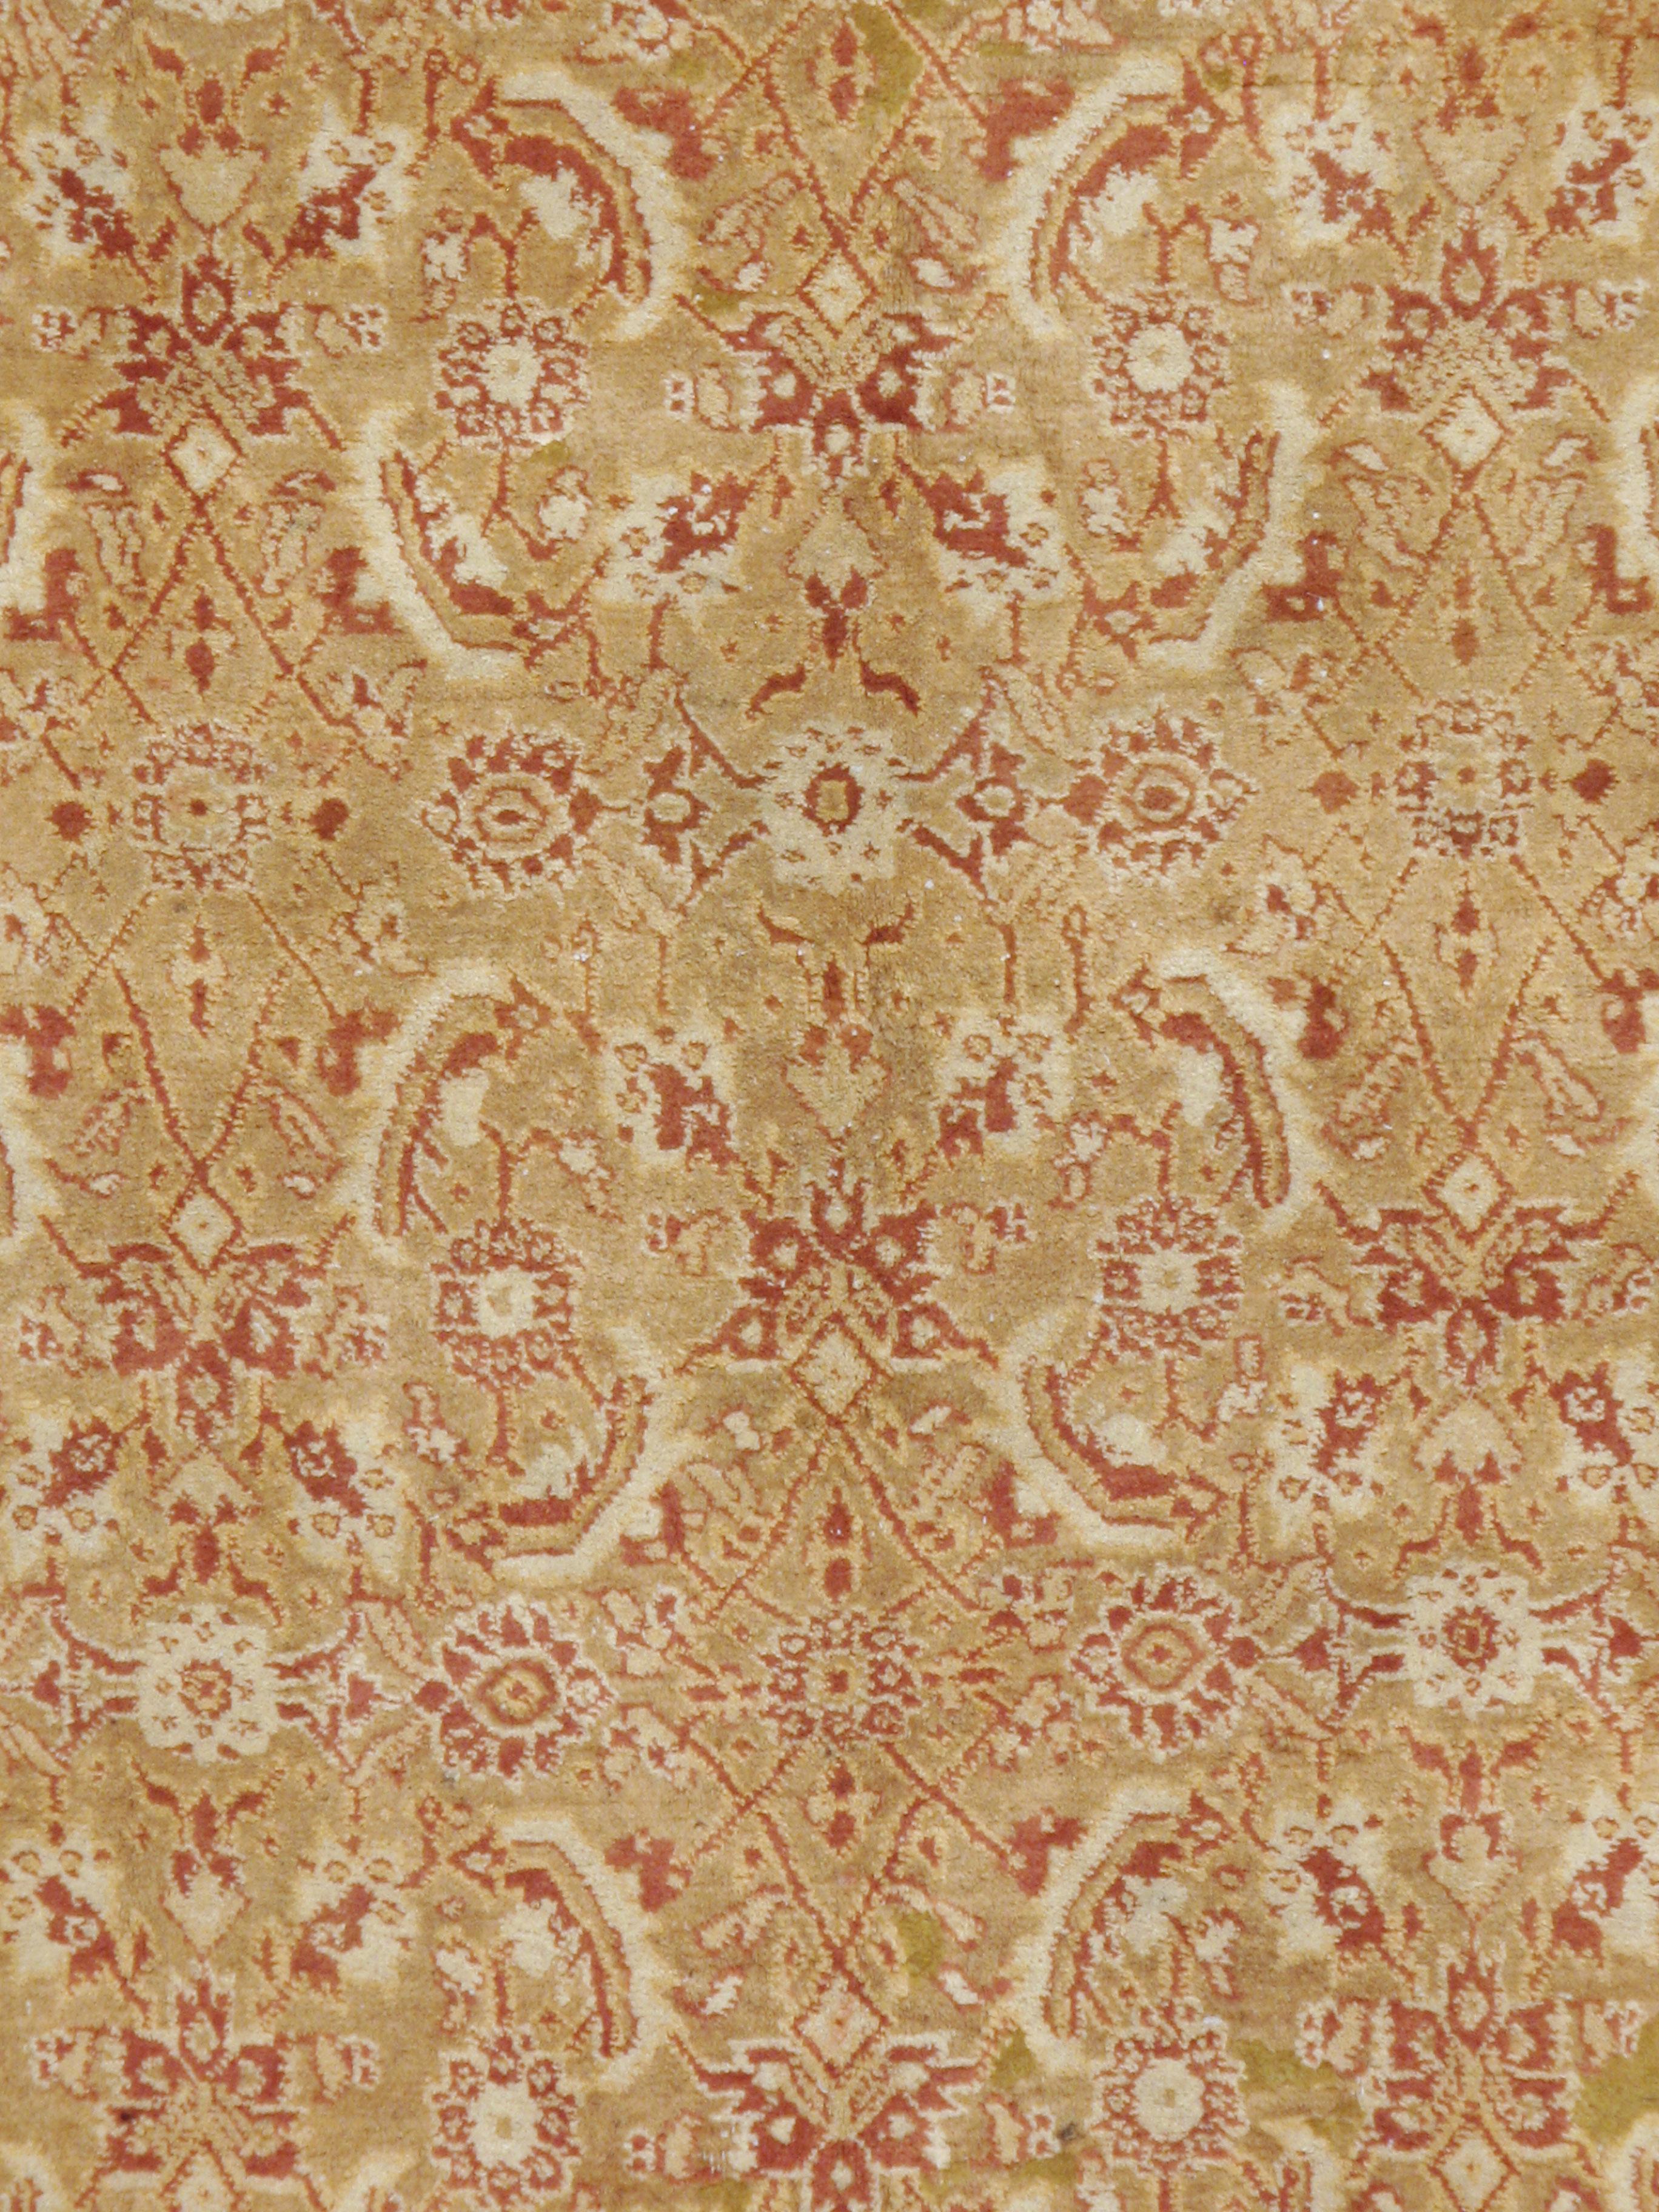 An antique Indian Agra rug from the early 20th century utilizing a large-scale rendition of the popular Persian 